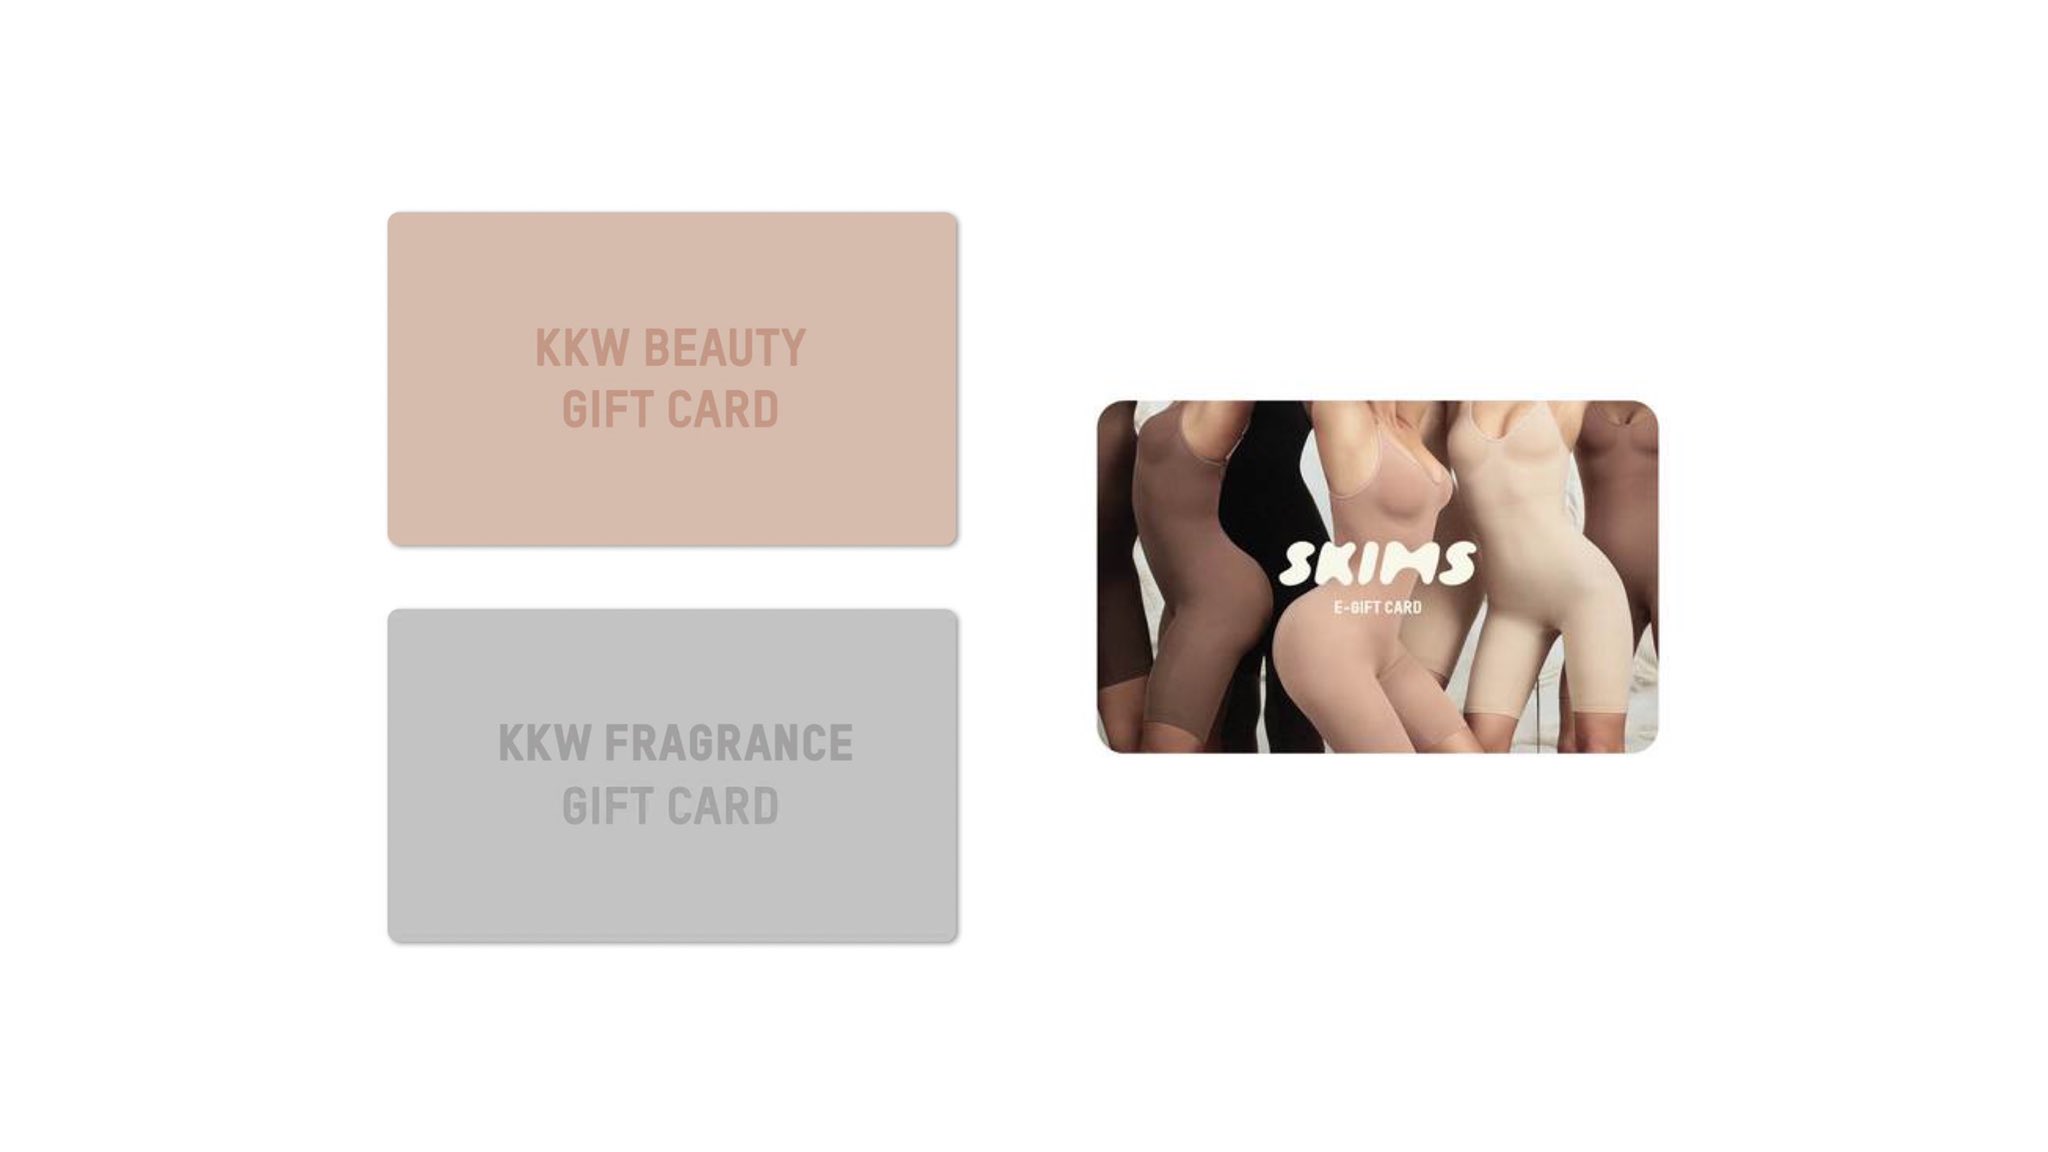 KKW MAFIA on X: Need last-minute gifts? Shop @kkwbeauty, @KKWFRAGRANCE & @ skims E-Gift Cards now just in time for the Holidays! 🎁   / X